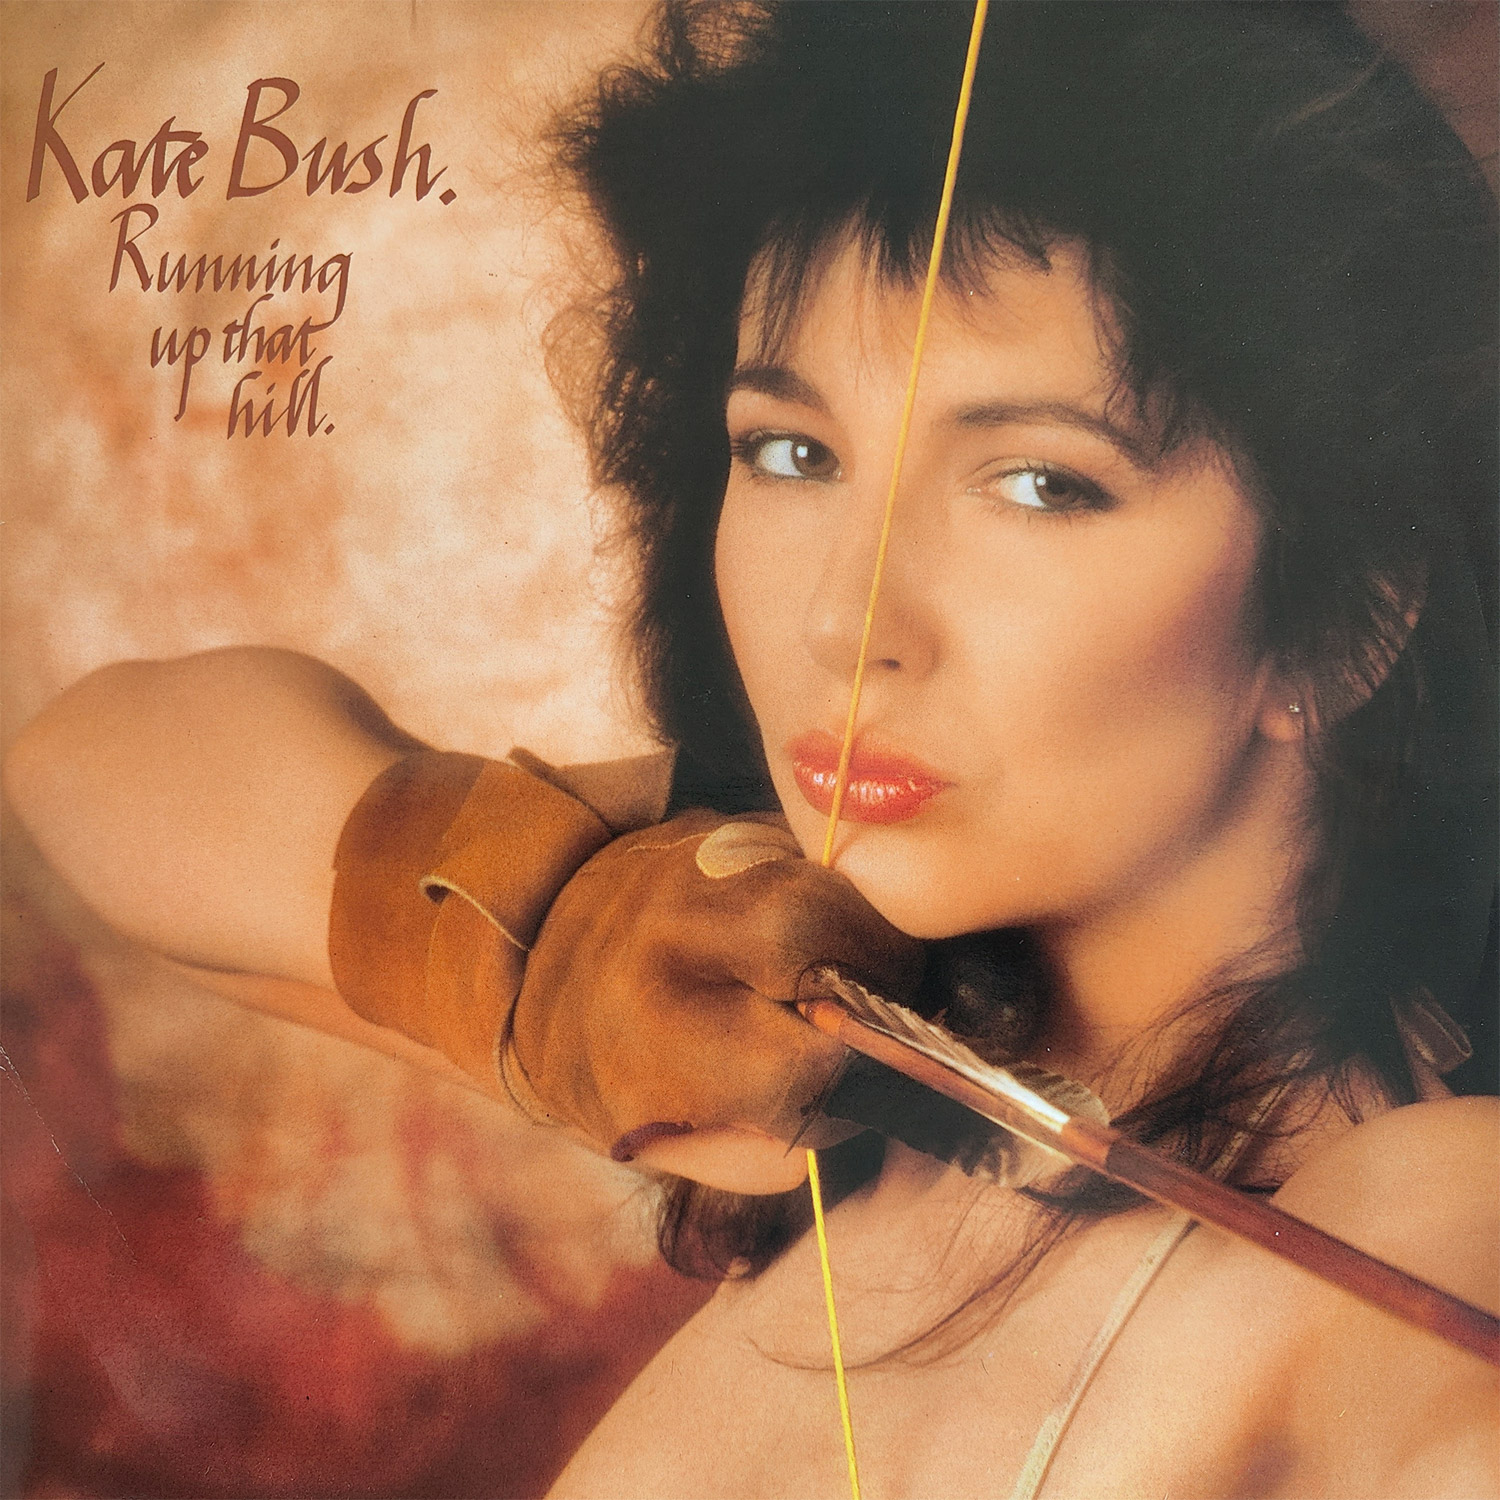 Everything you've always wanted to know about Kate Bush's 'Running Up That Hill' but were afraid to ask